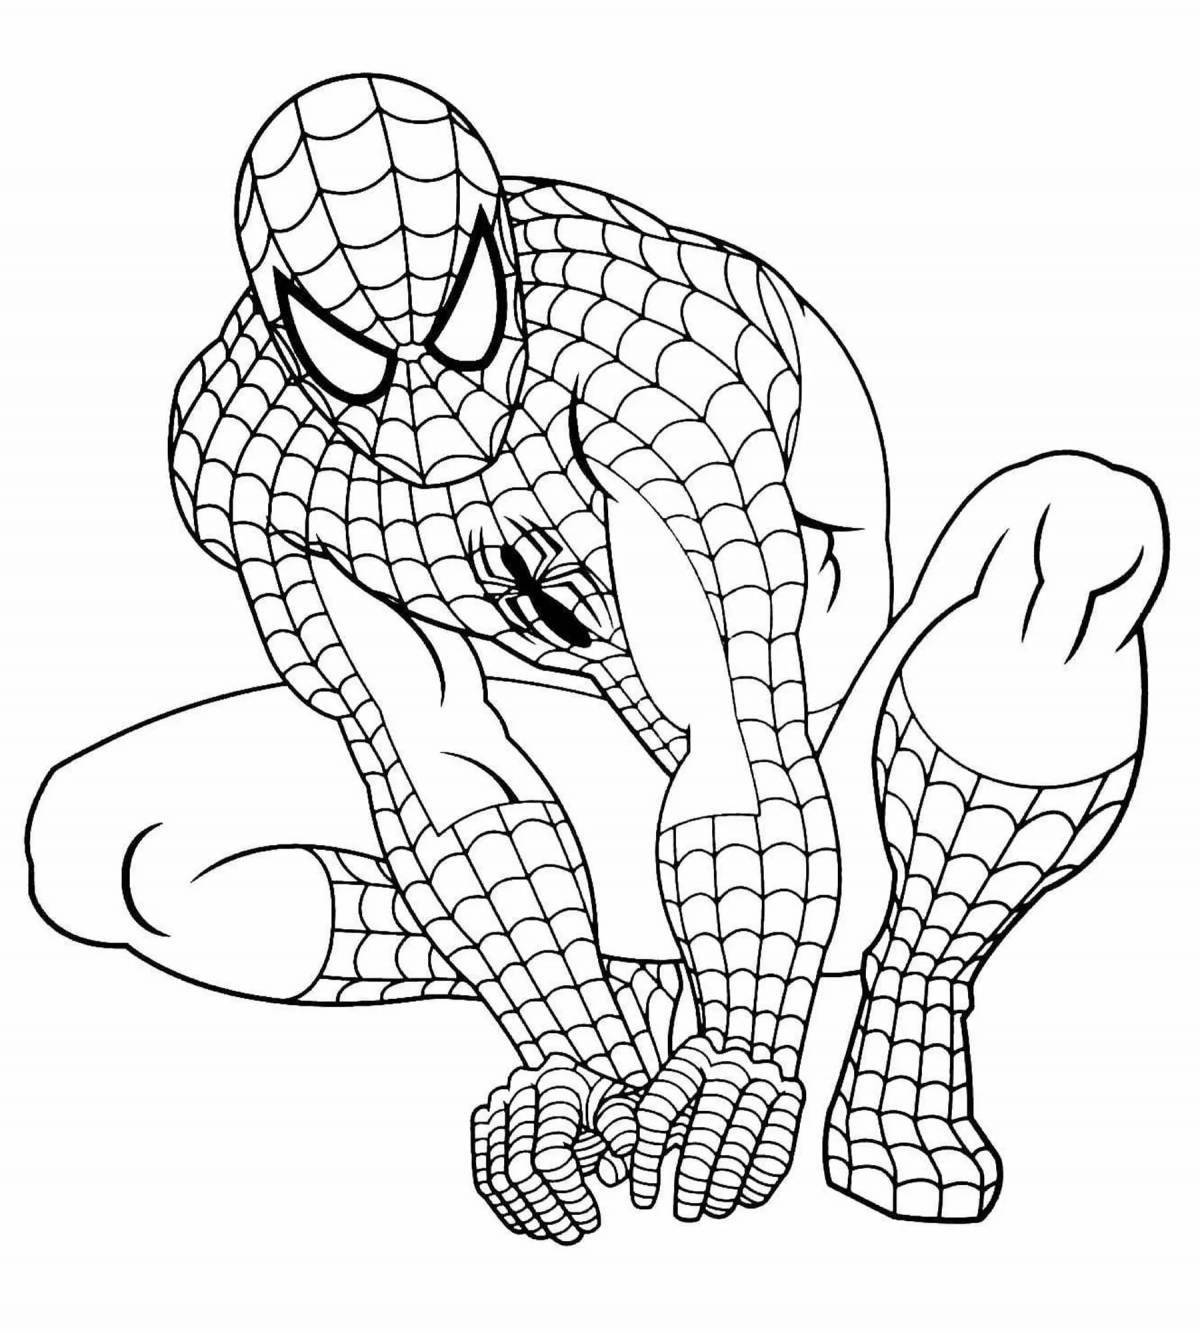 Coloring book soothing spider-man antistress